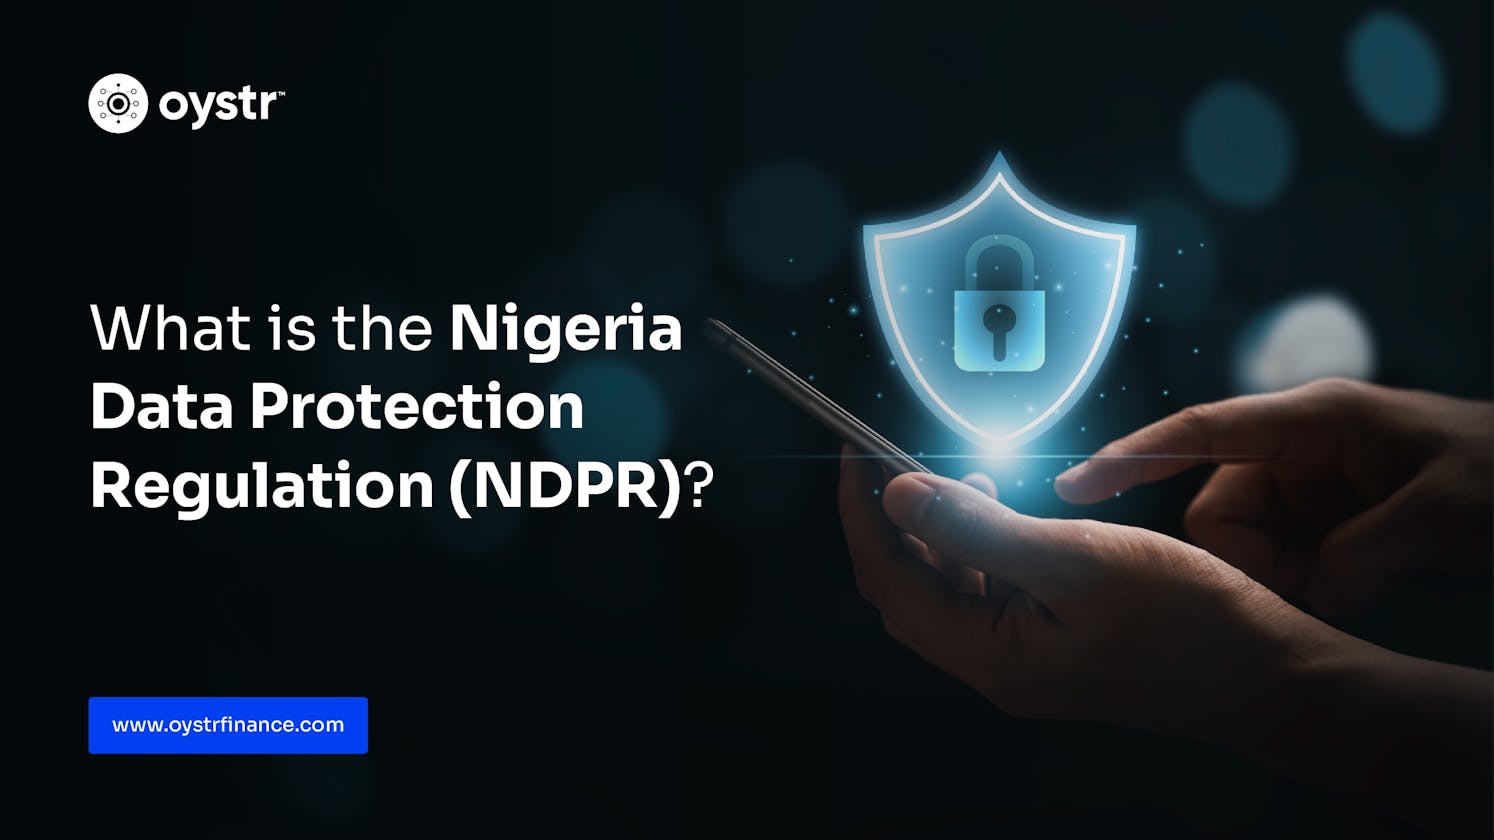 What is the Nigeria Data Protection Regulation (NDPR)?